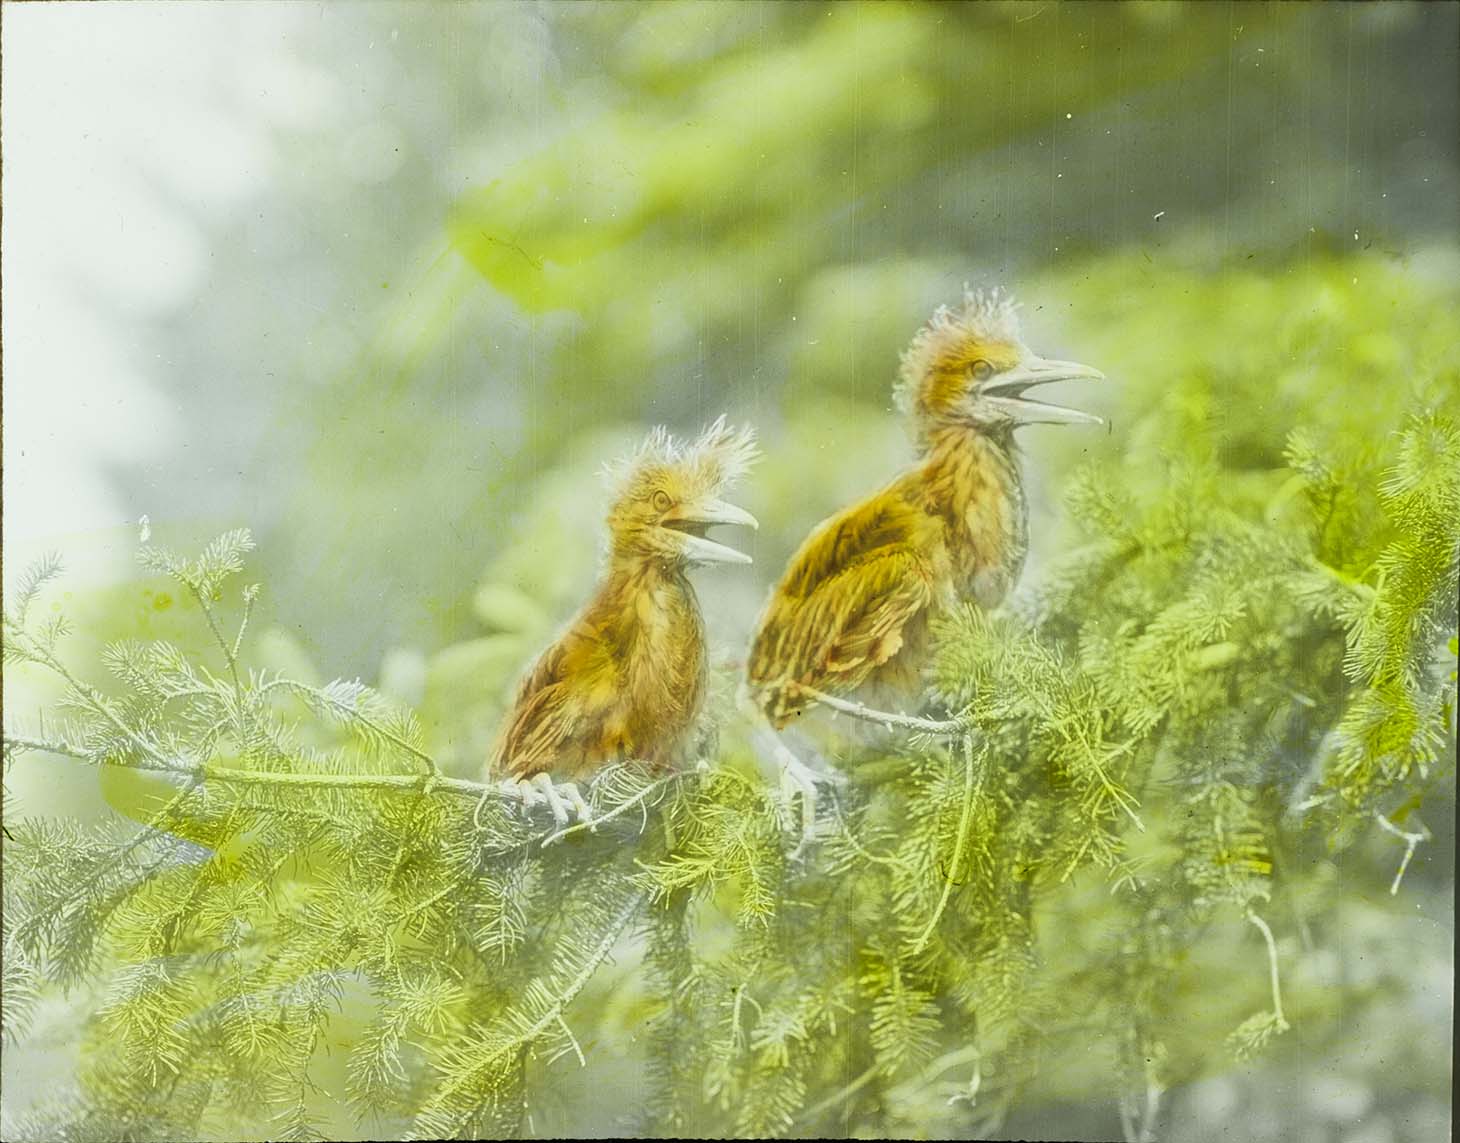 Lantern slide and photograph of two young Black-crowned Night Herons perching on an evergreen branch